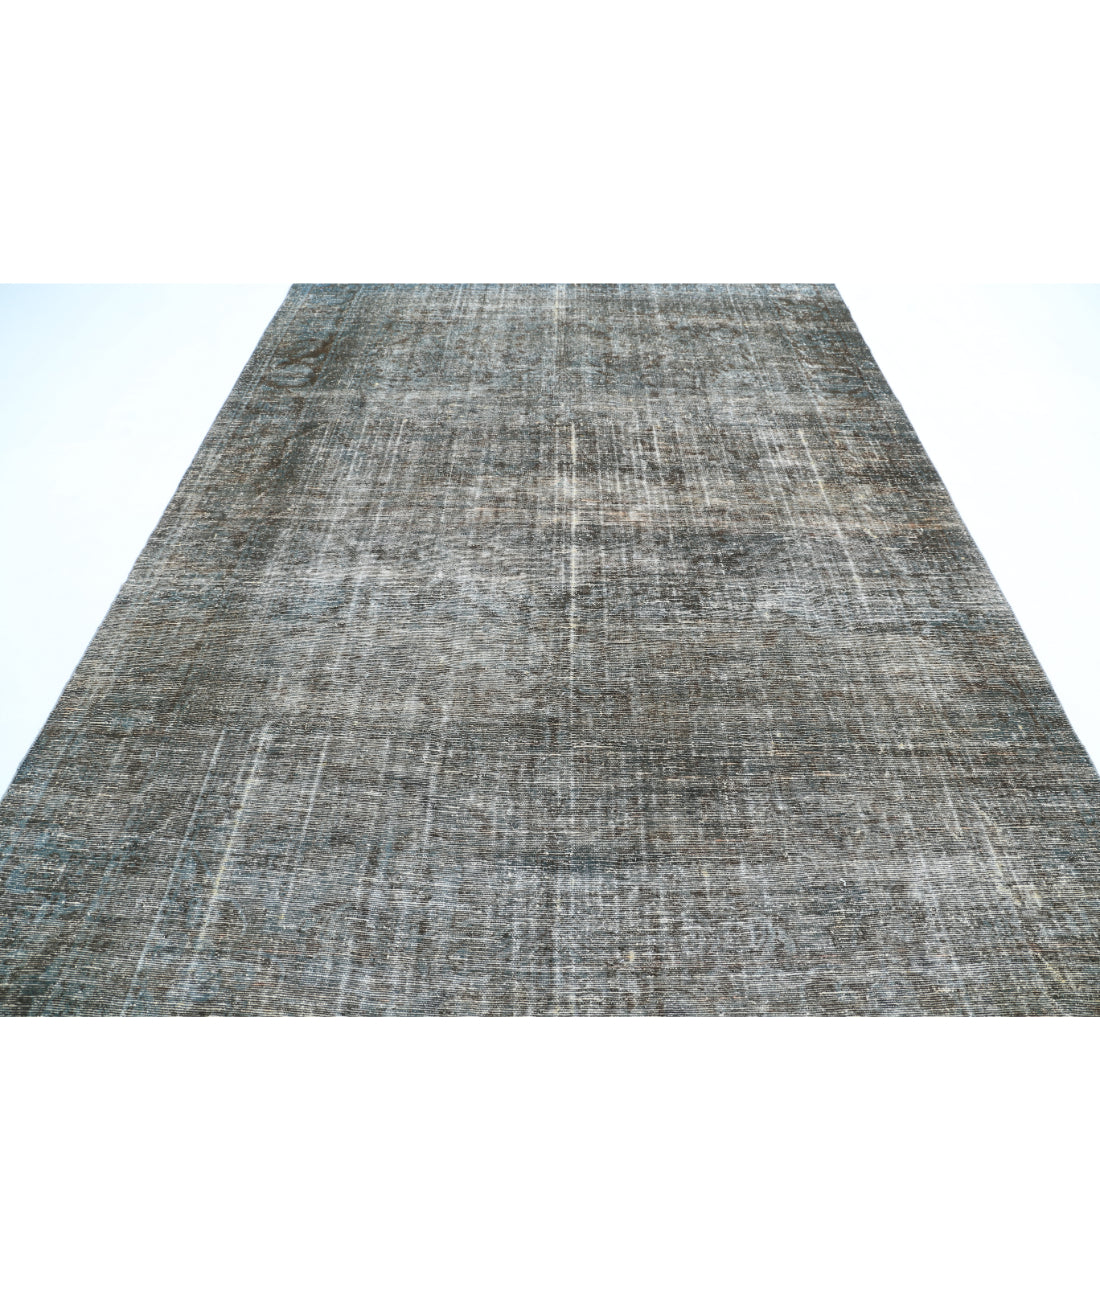 Hand Knotted Vintage Distressed Persian Kashan Wool Rug - 7'3'' x 11'2'' 7'3'' x 11'2'' (218 X 335) / Blue / Charcoal